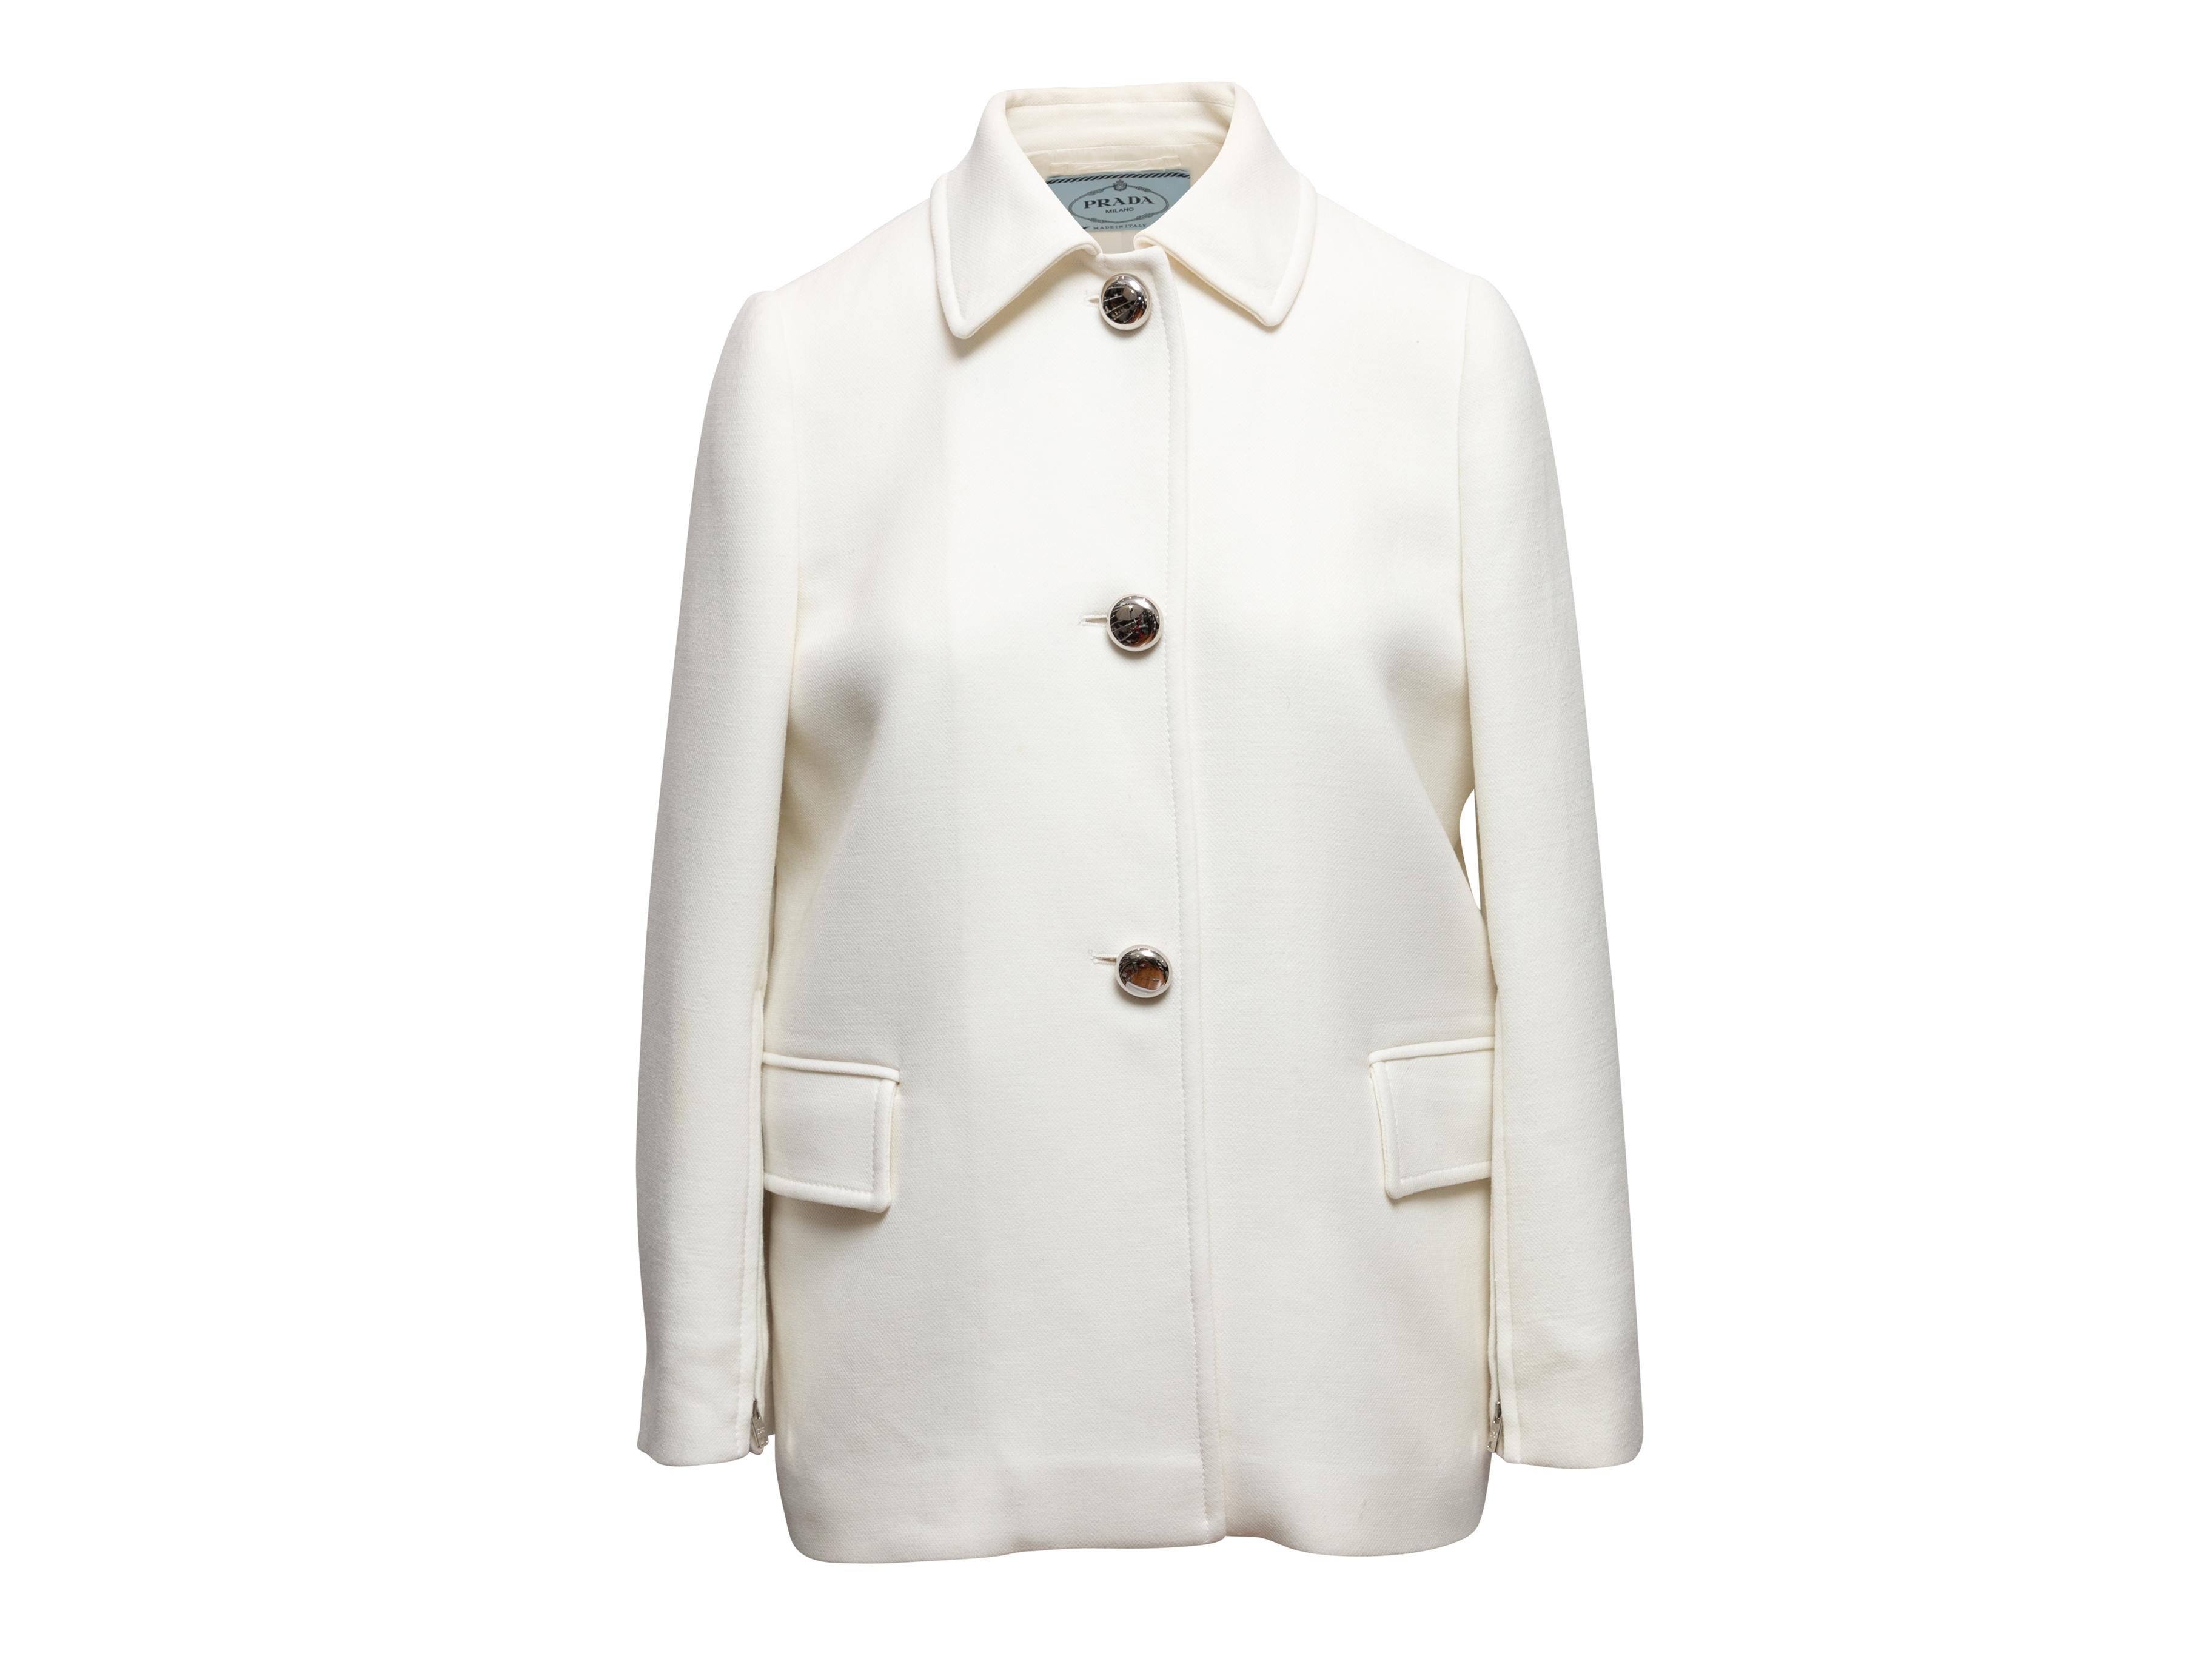 White wool jacket by Prada. Pointed collar. Dual hip pockets. Silver-tone button closures at front. 37